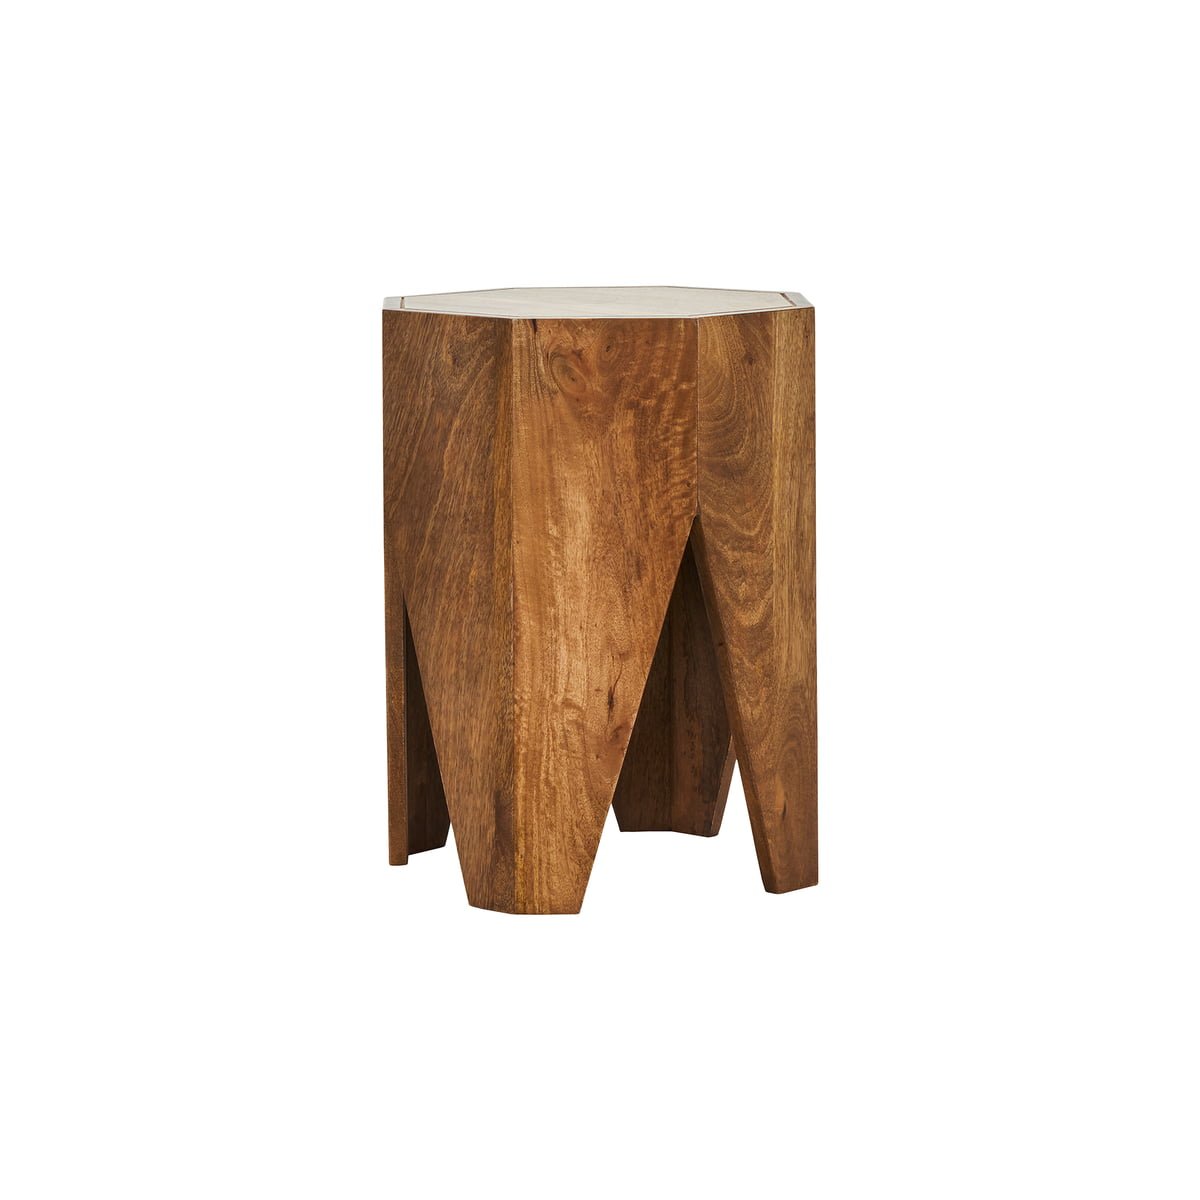 Okta - Nature stool from House Doctor